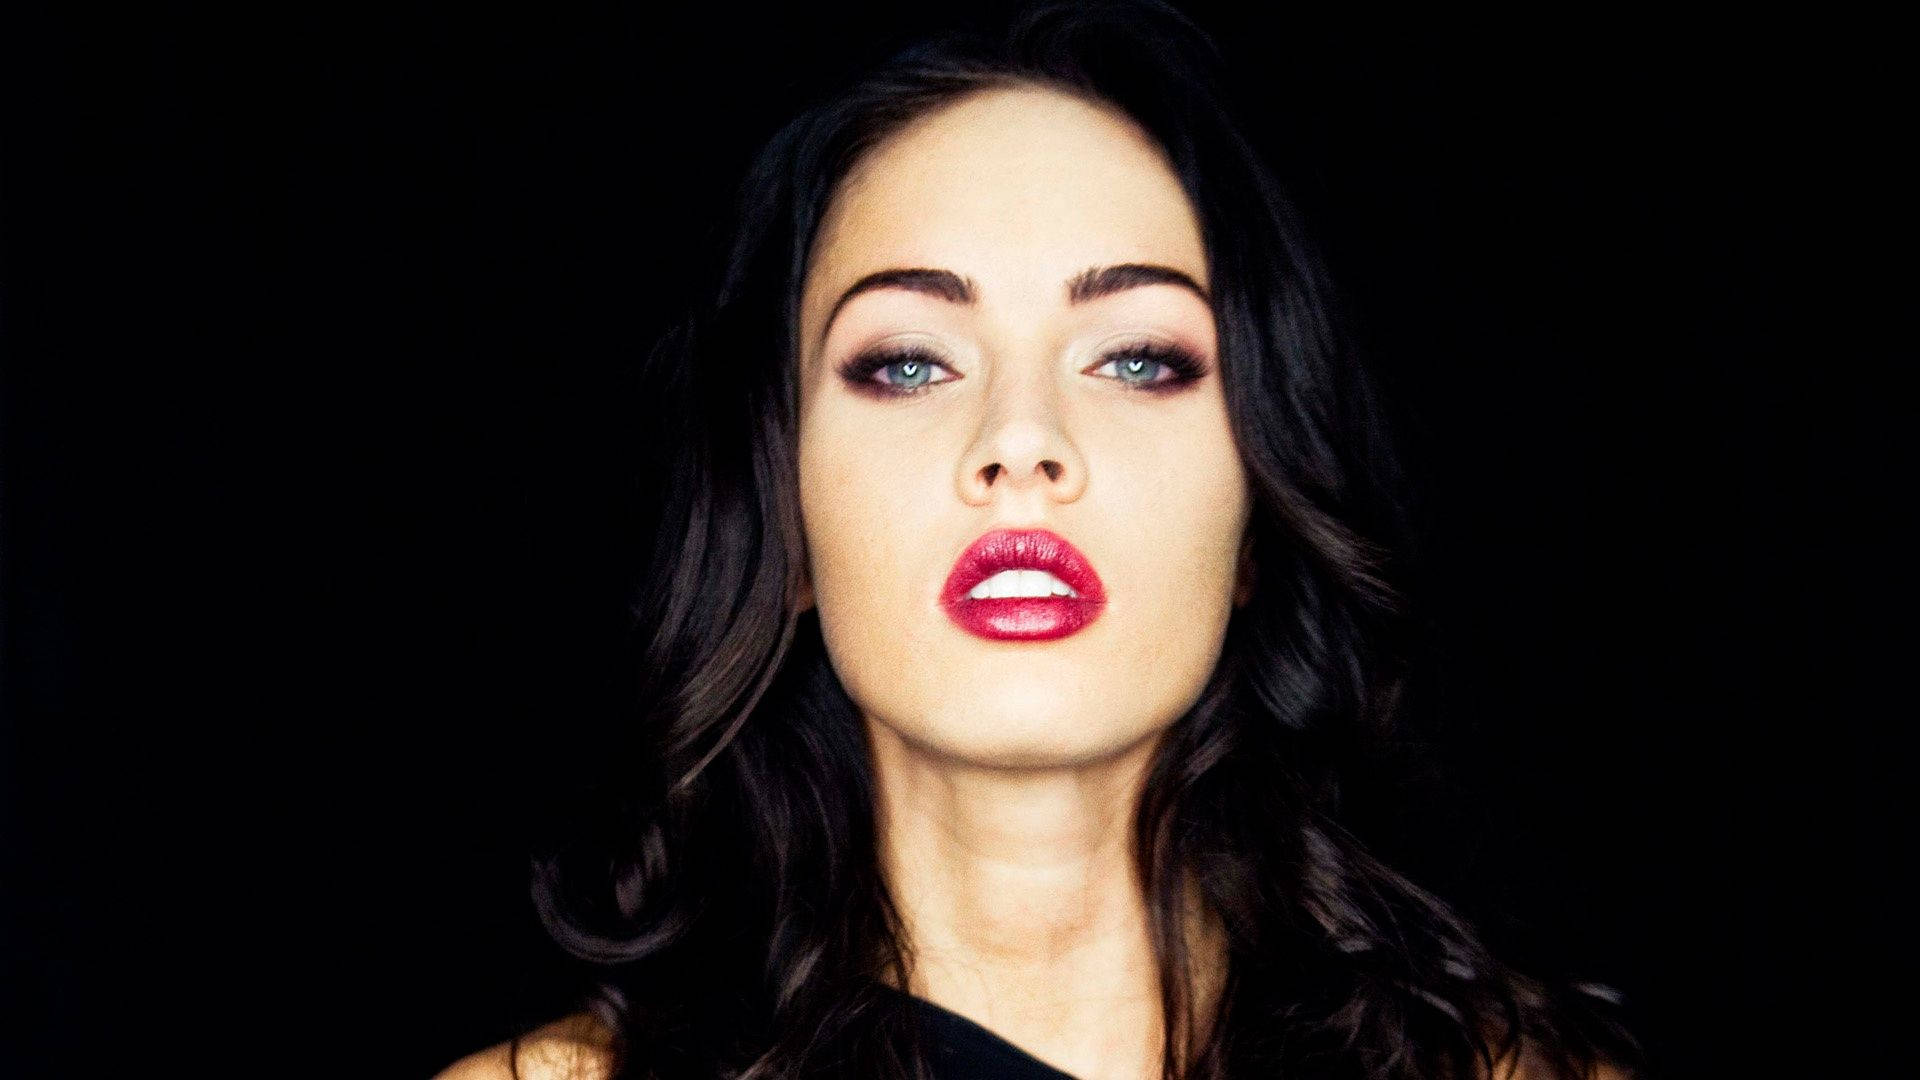 Megan Fox Looking Seductive With Her Signature Red Lips Background